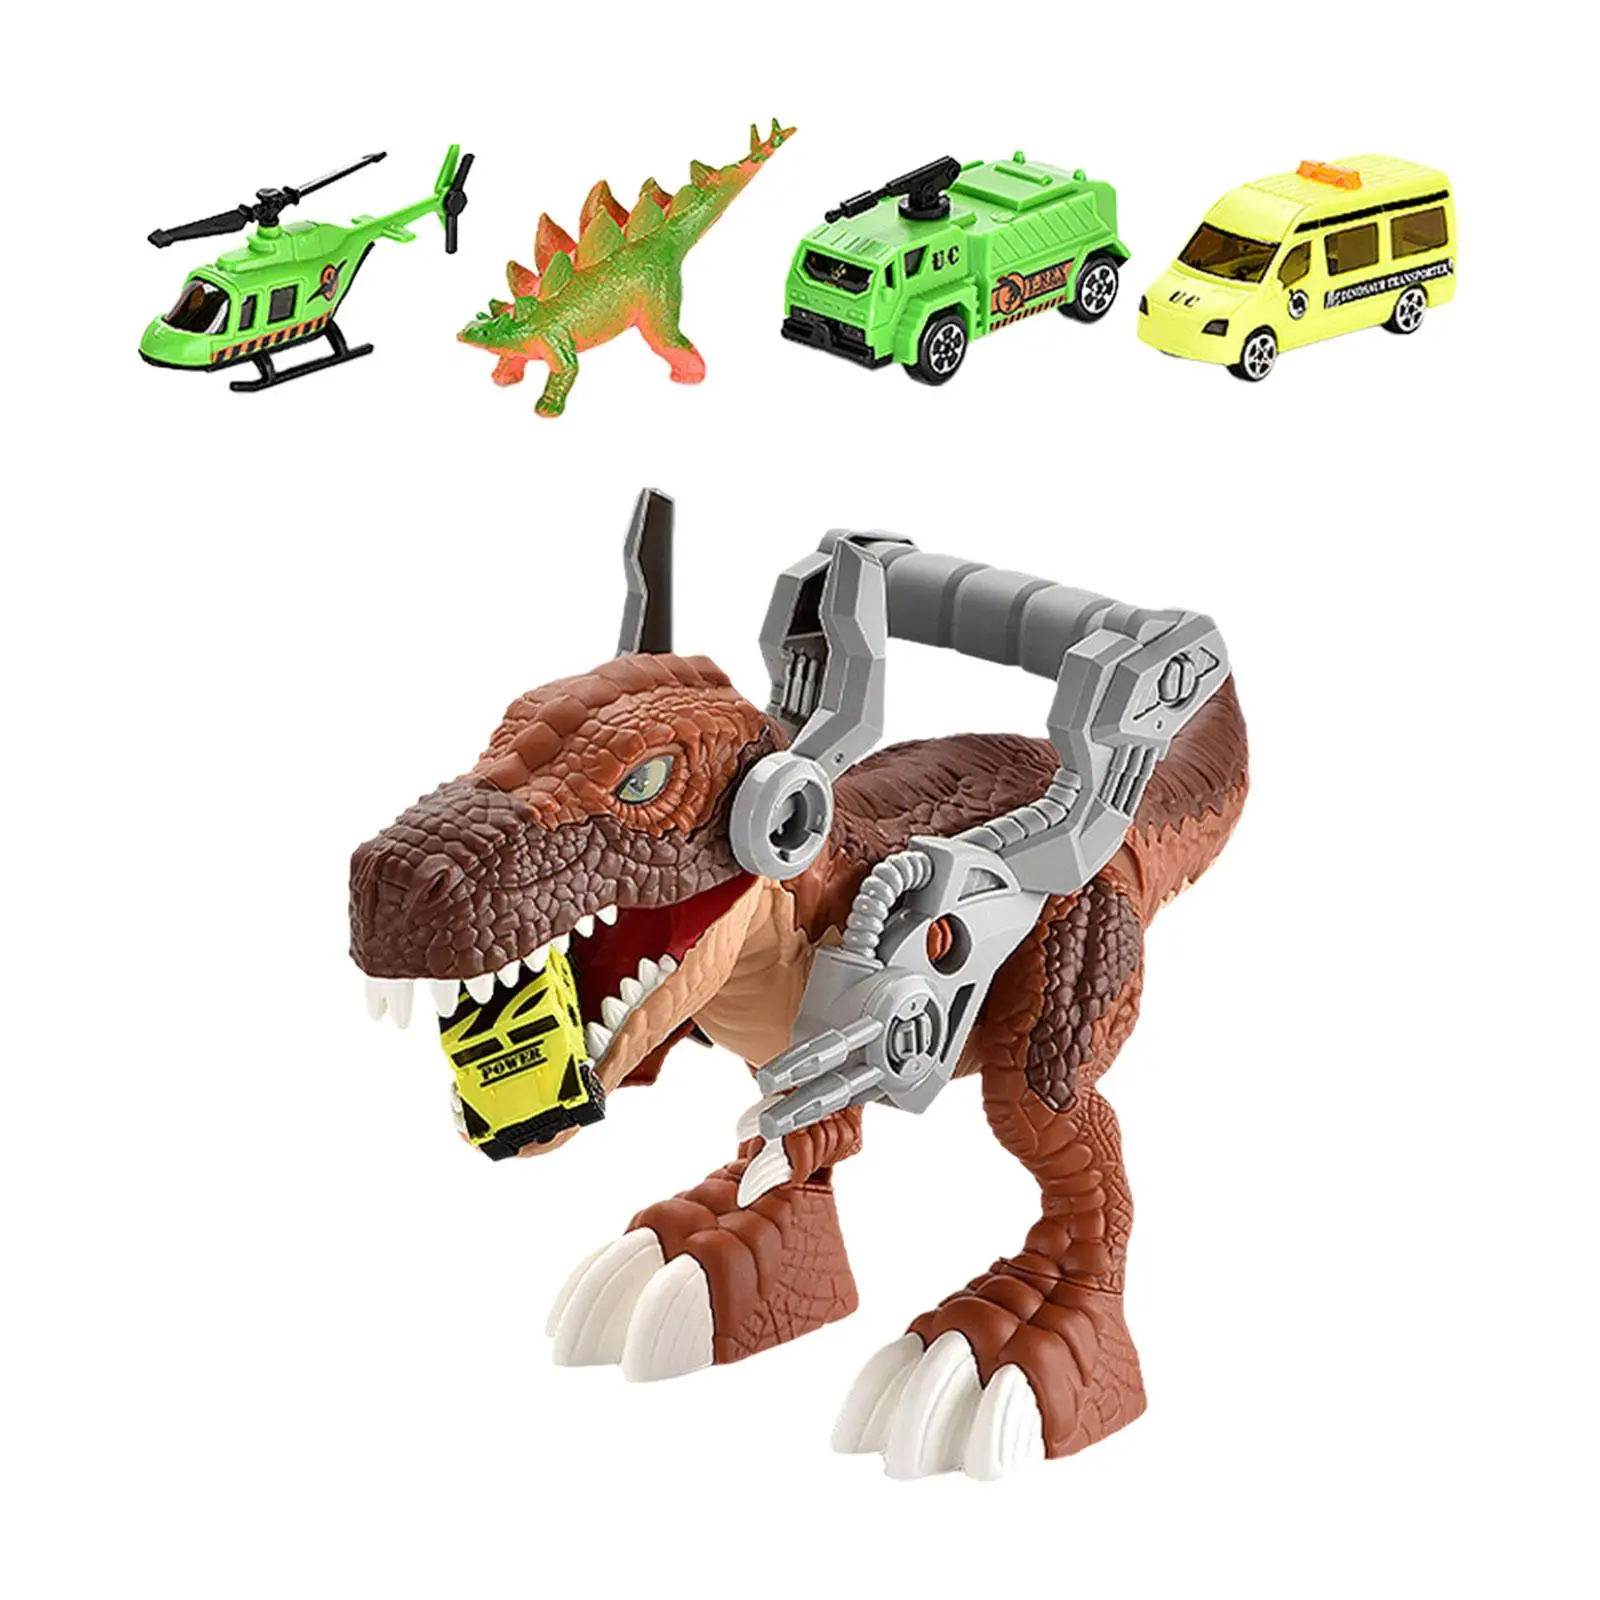 

Dinosaur Truck Car Toy Dinosaur Swallowing Vehicle Educational Dinosaur Swallow Transport Car Toy for Students Couples Female